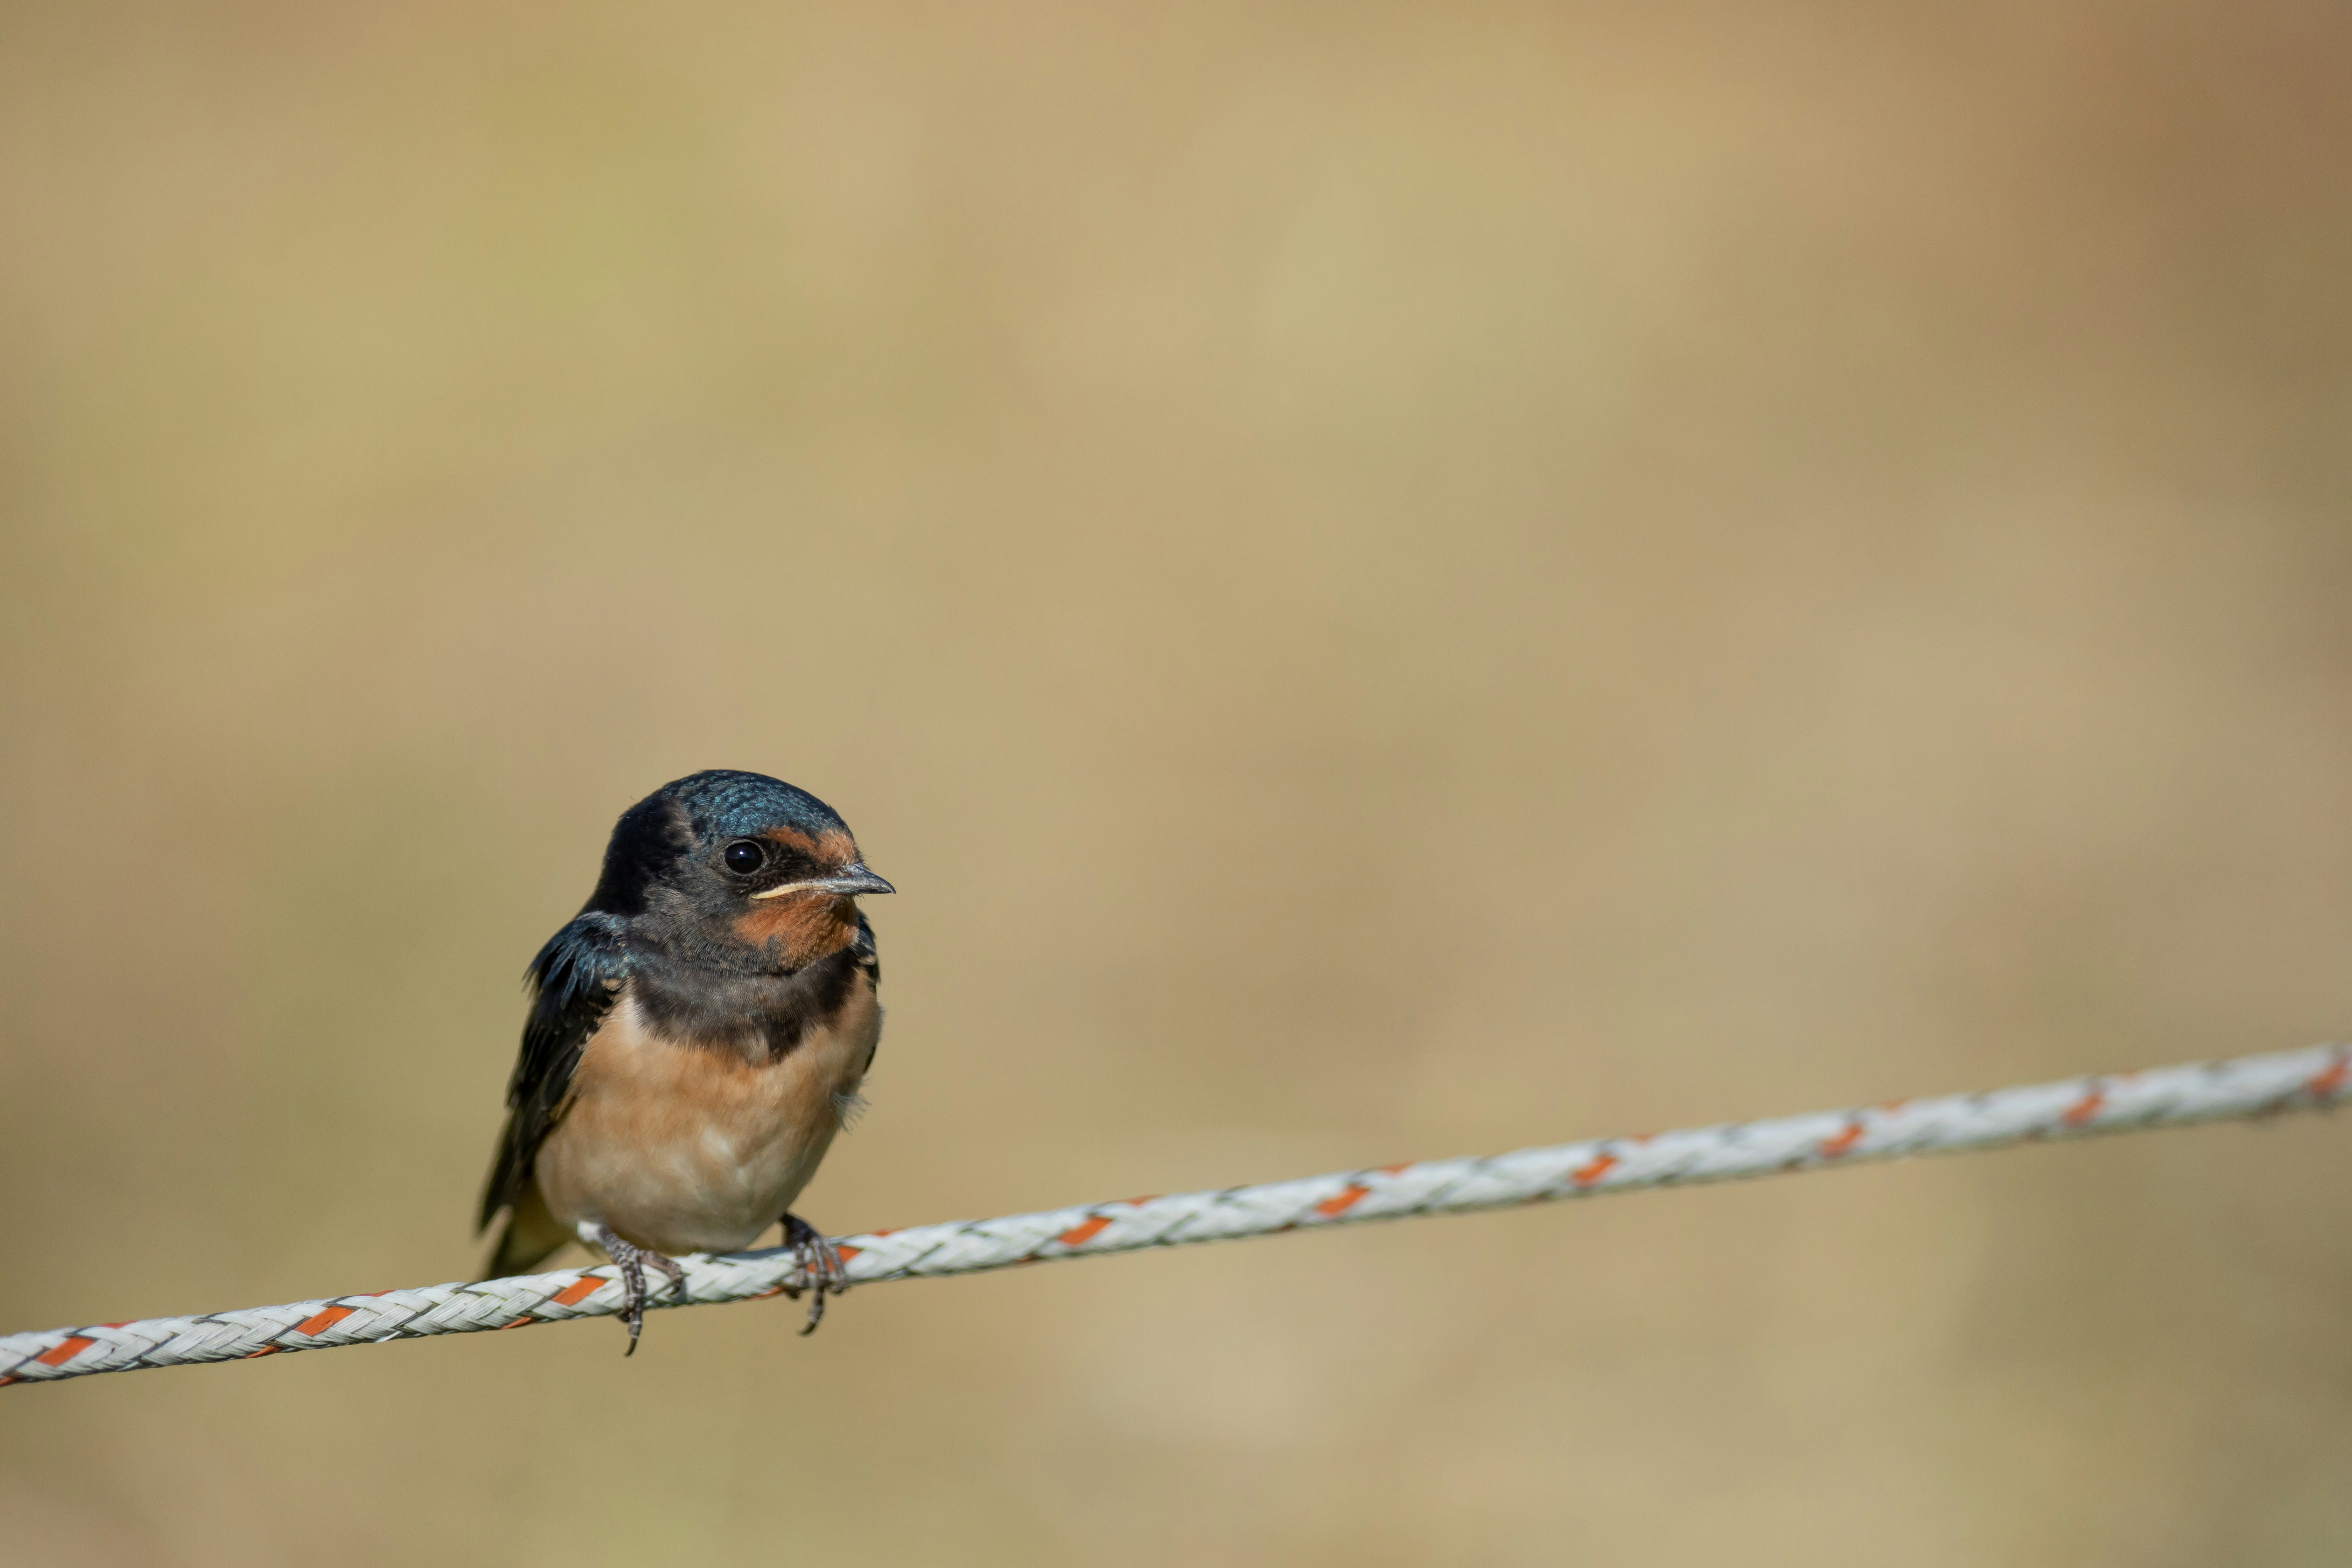 brown and blue bird on brown wooden stick during daytime